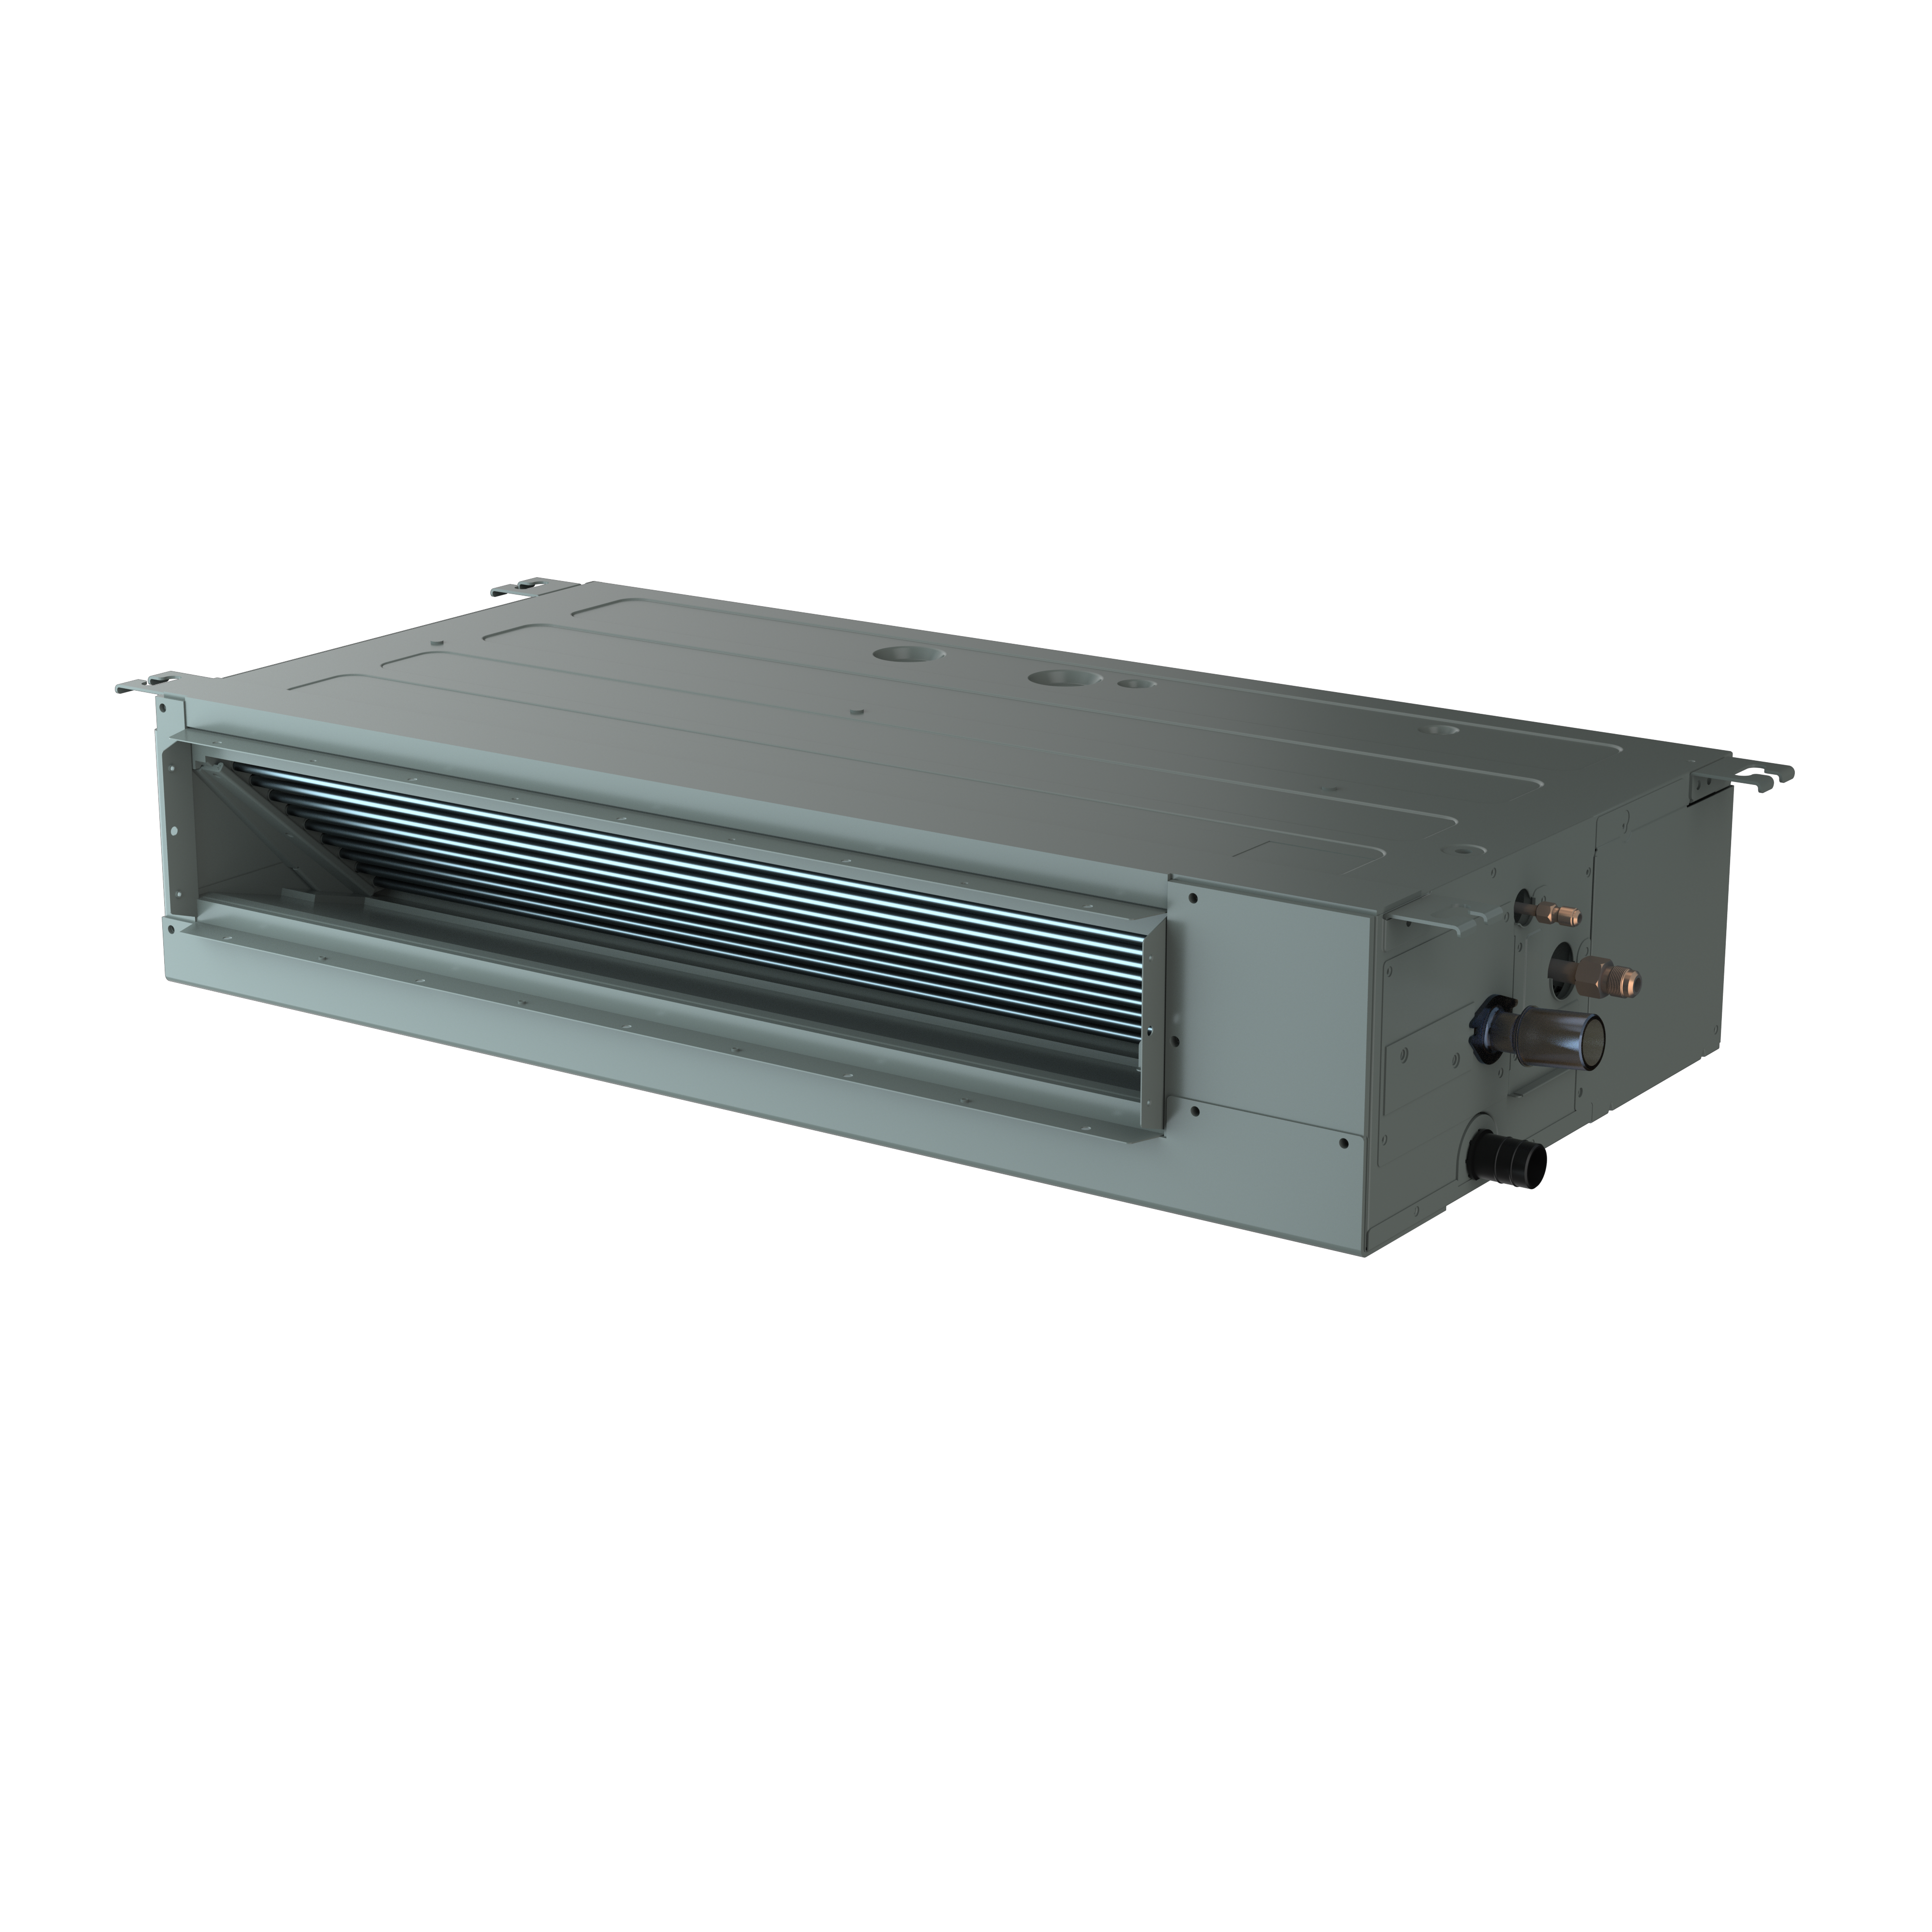 Air-Con 42,000 BTU 20 SEER 4-Zone Concealed Duct 9k+9k+9k+9k Mini Split Air Conditioner and Heater System